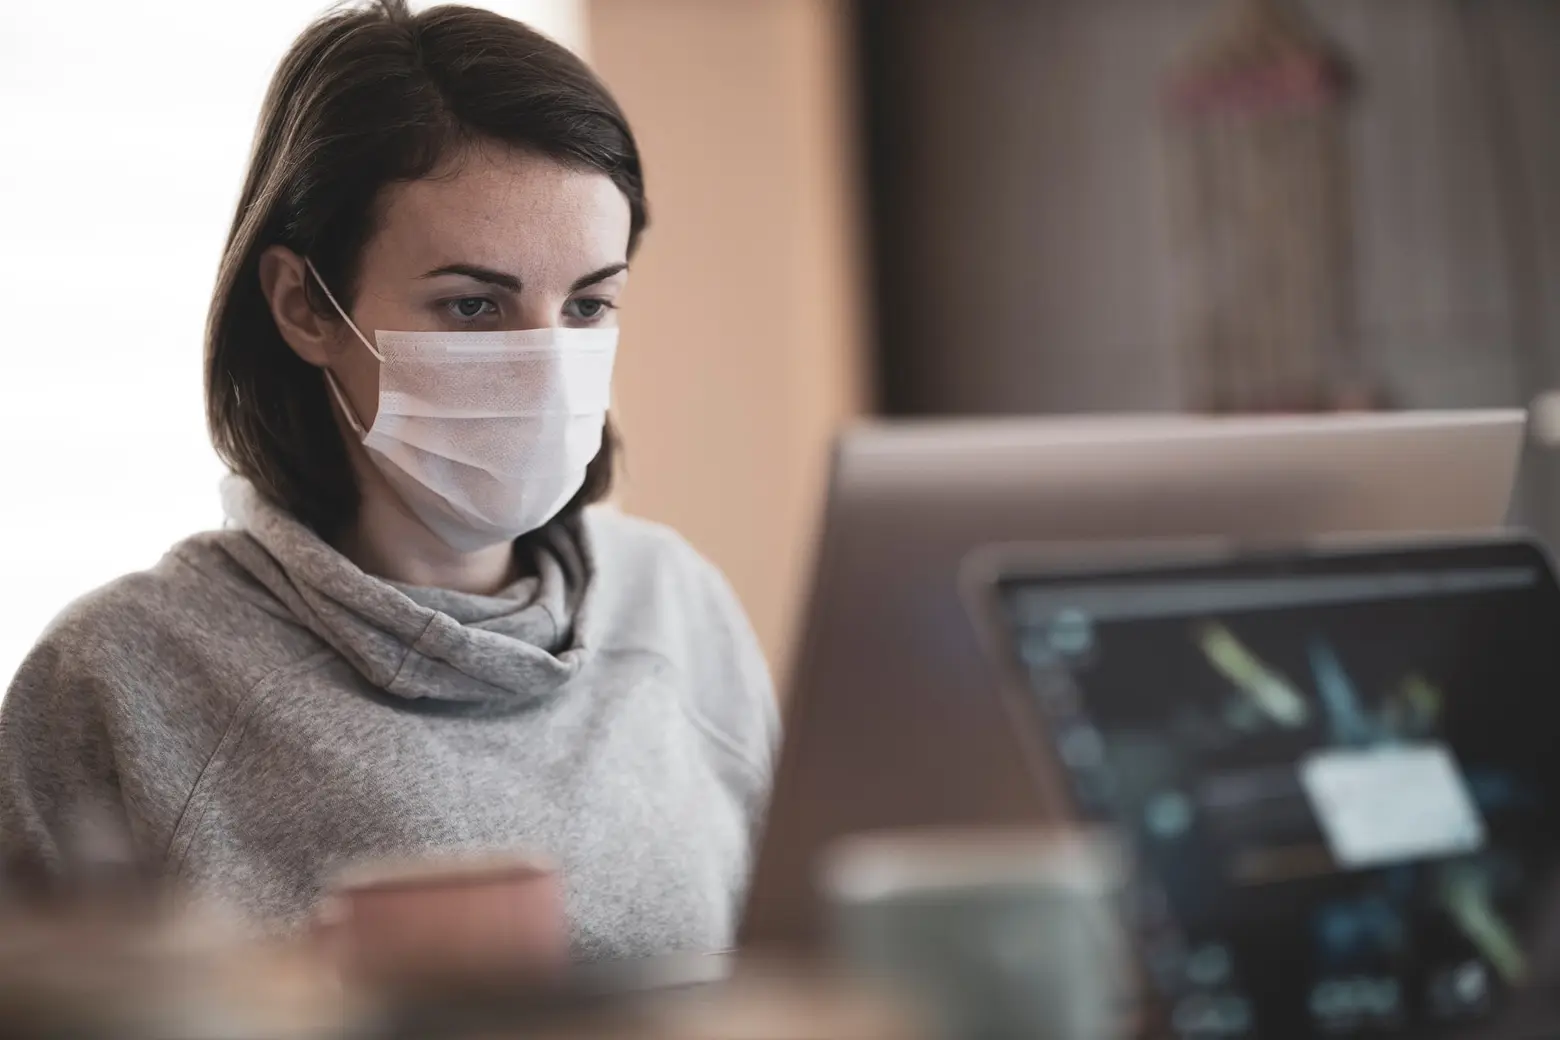 Face masks, health screenings now required at all NJ workplaces